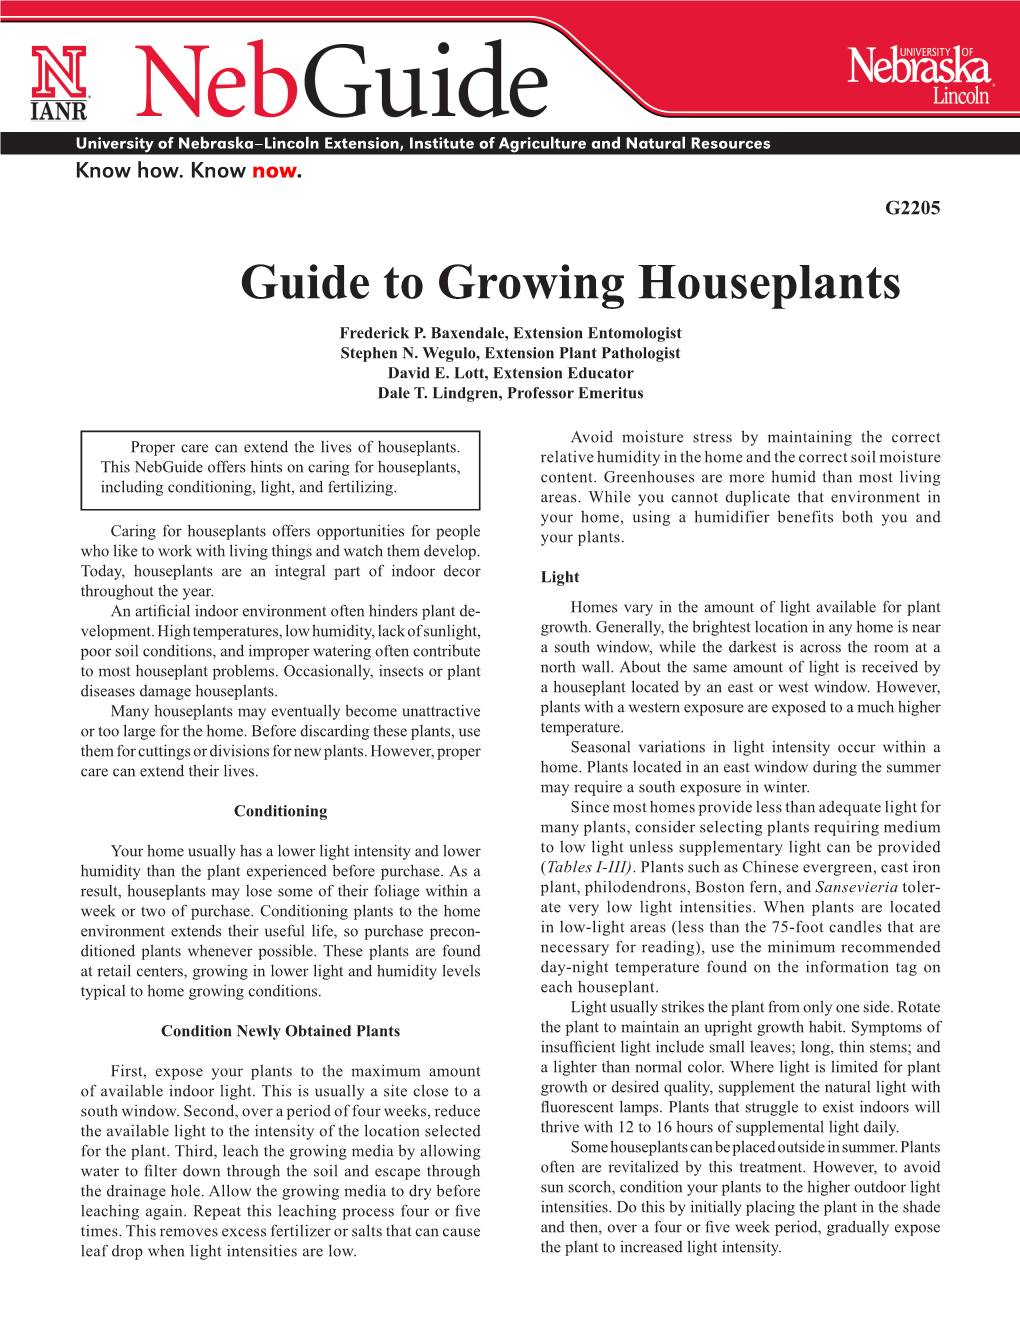 Guide to Growing Houseplants Frederick P